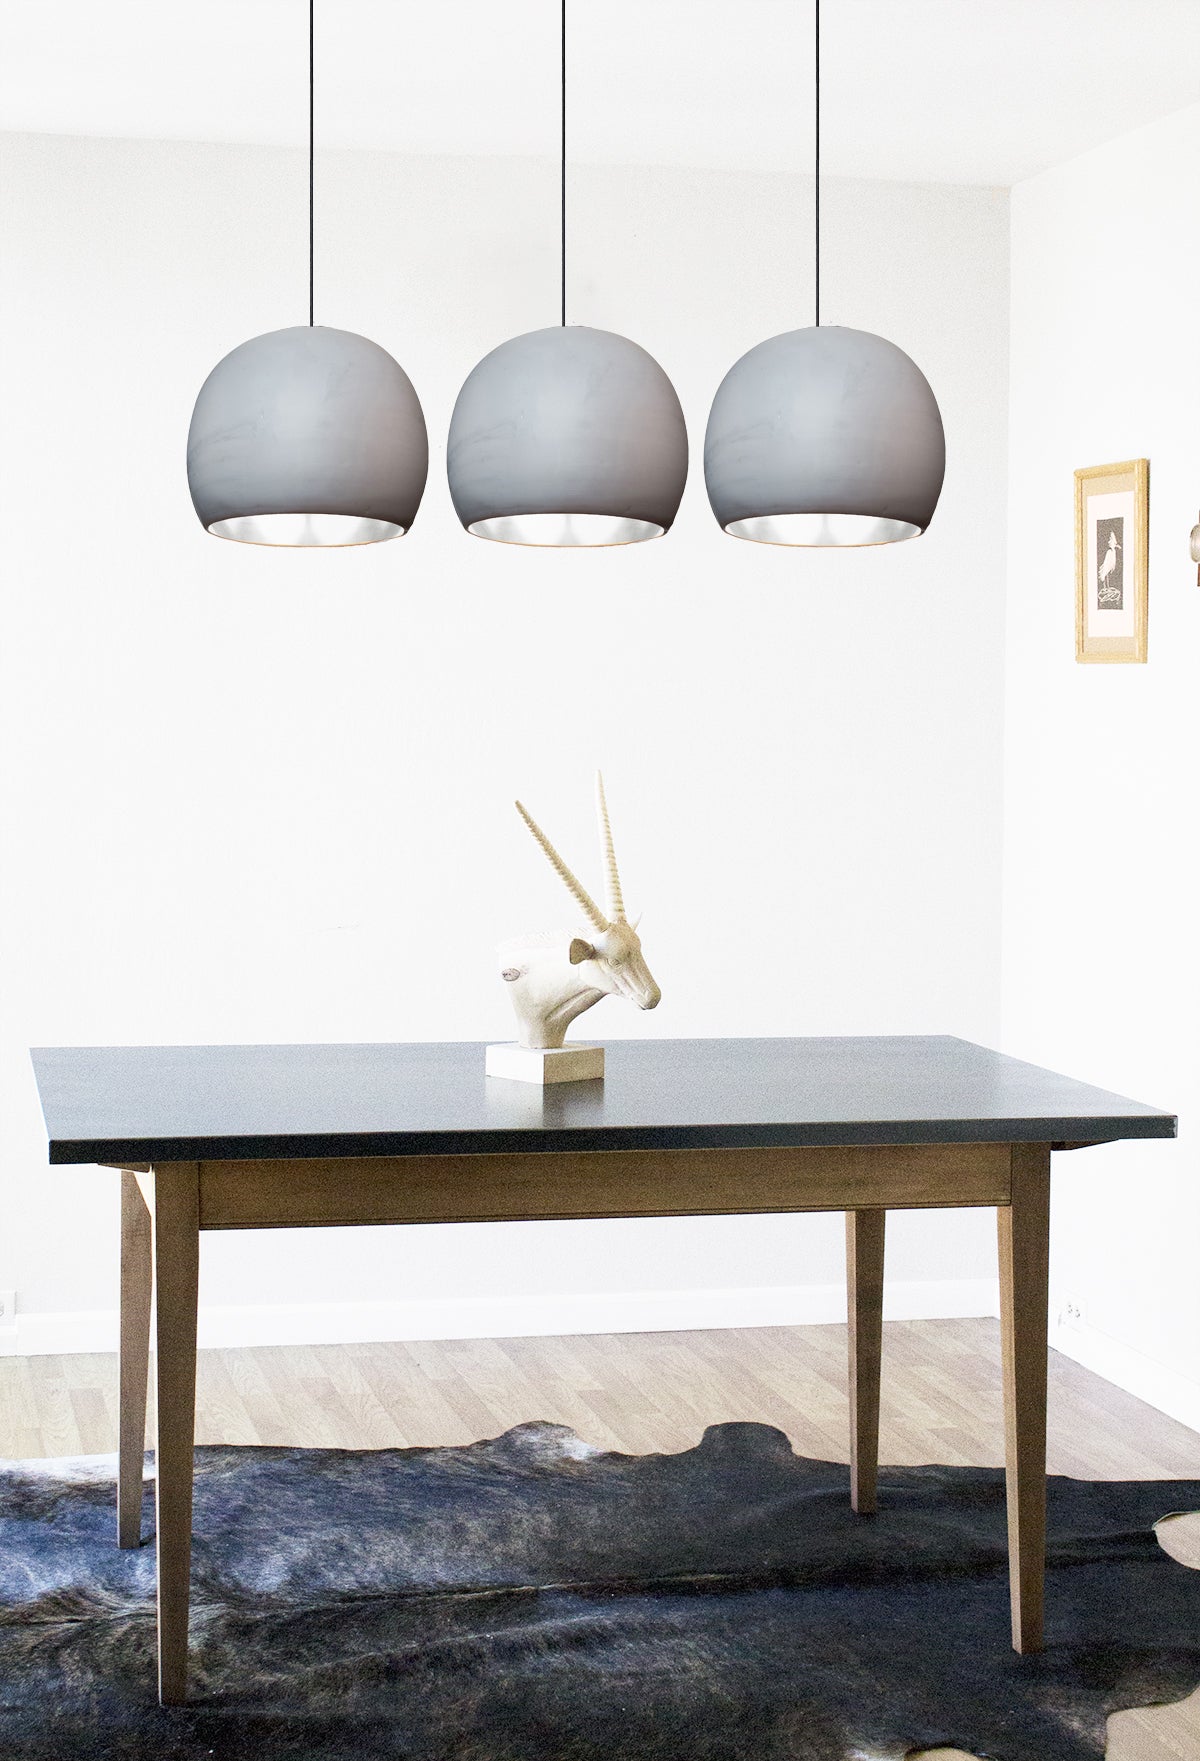 12&quot; Matte Grey &amp; Silver Leaf Clay Pendant Light- Black Downrod Hammers and Heels